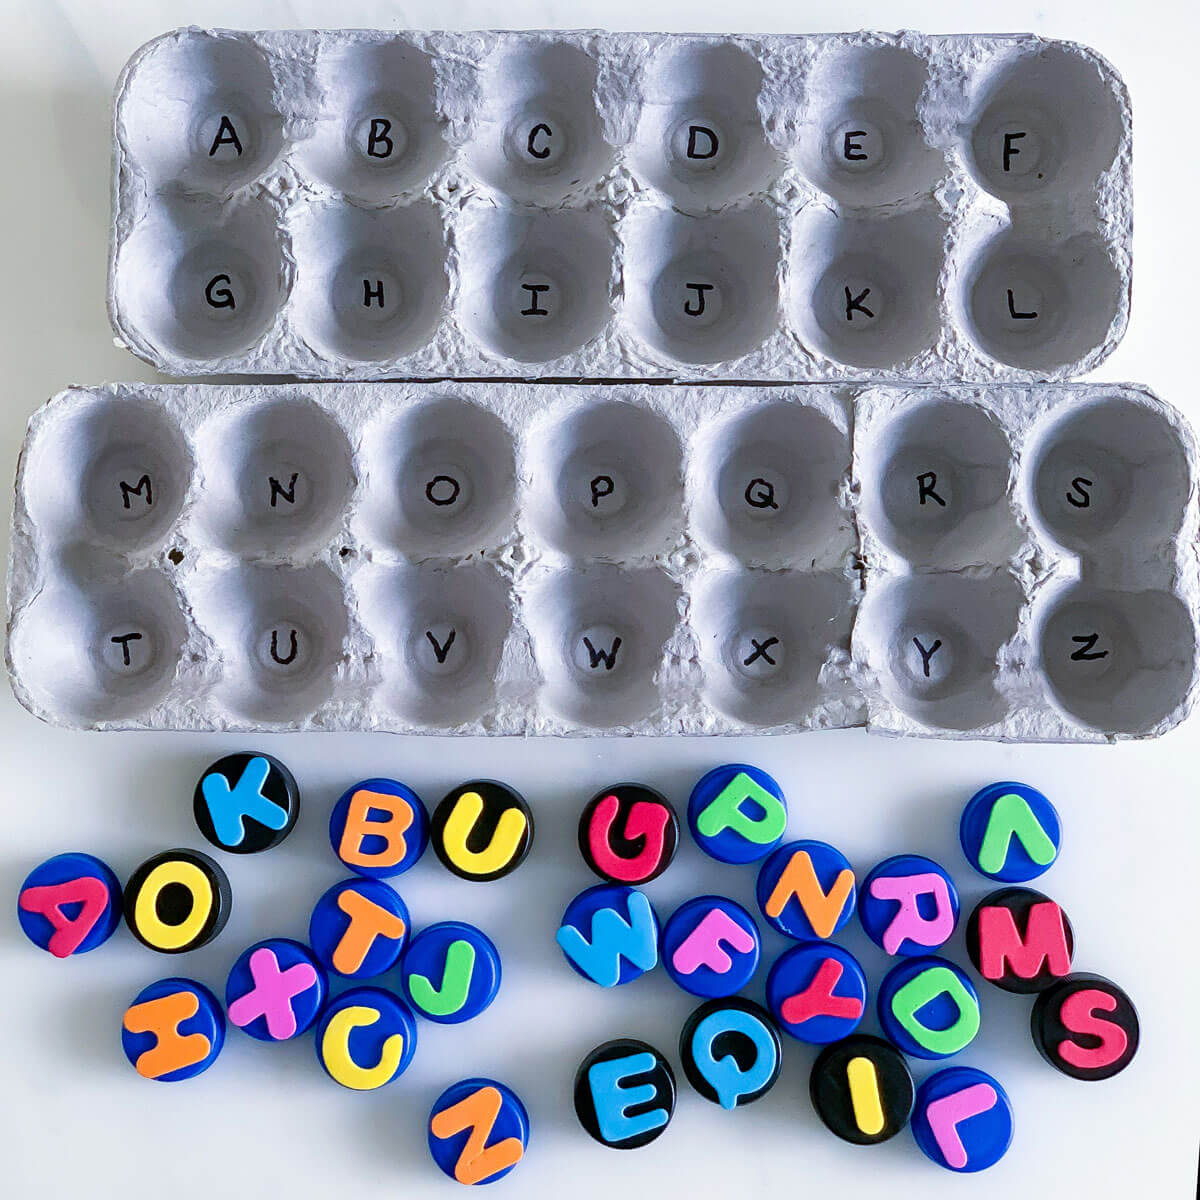 matching letter game using recycled egg carton bottle cap diy alphabet puzzle